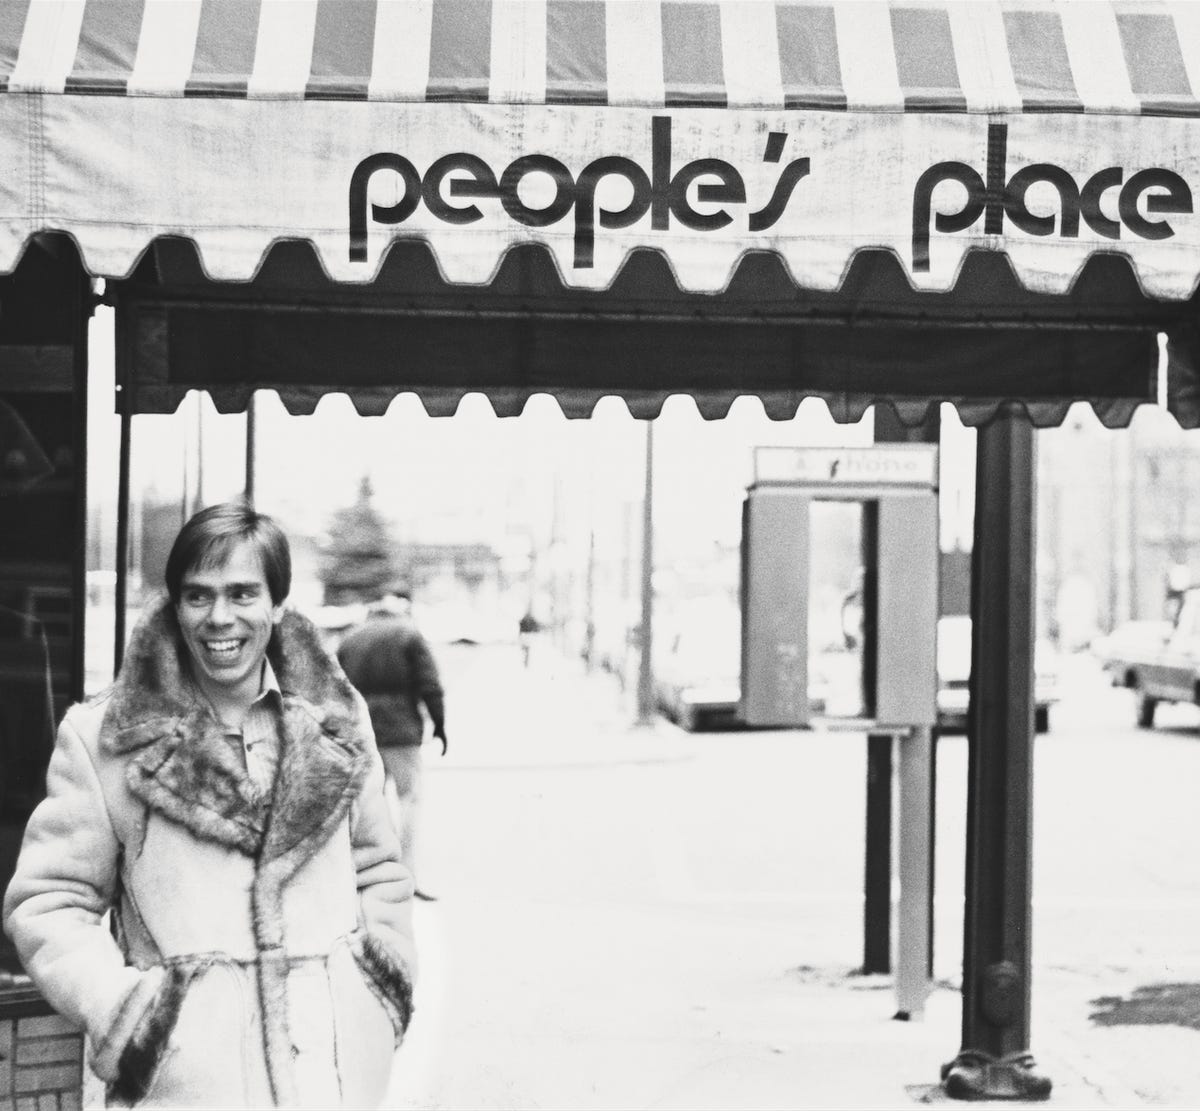 Tommy Hilfiger on Twitter: "People's Place was my first store. It's where  it all began! - TH http://t.co/0QdIvWyia9" / Twitter